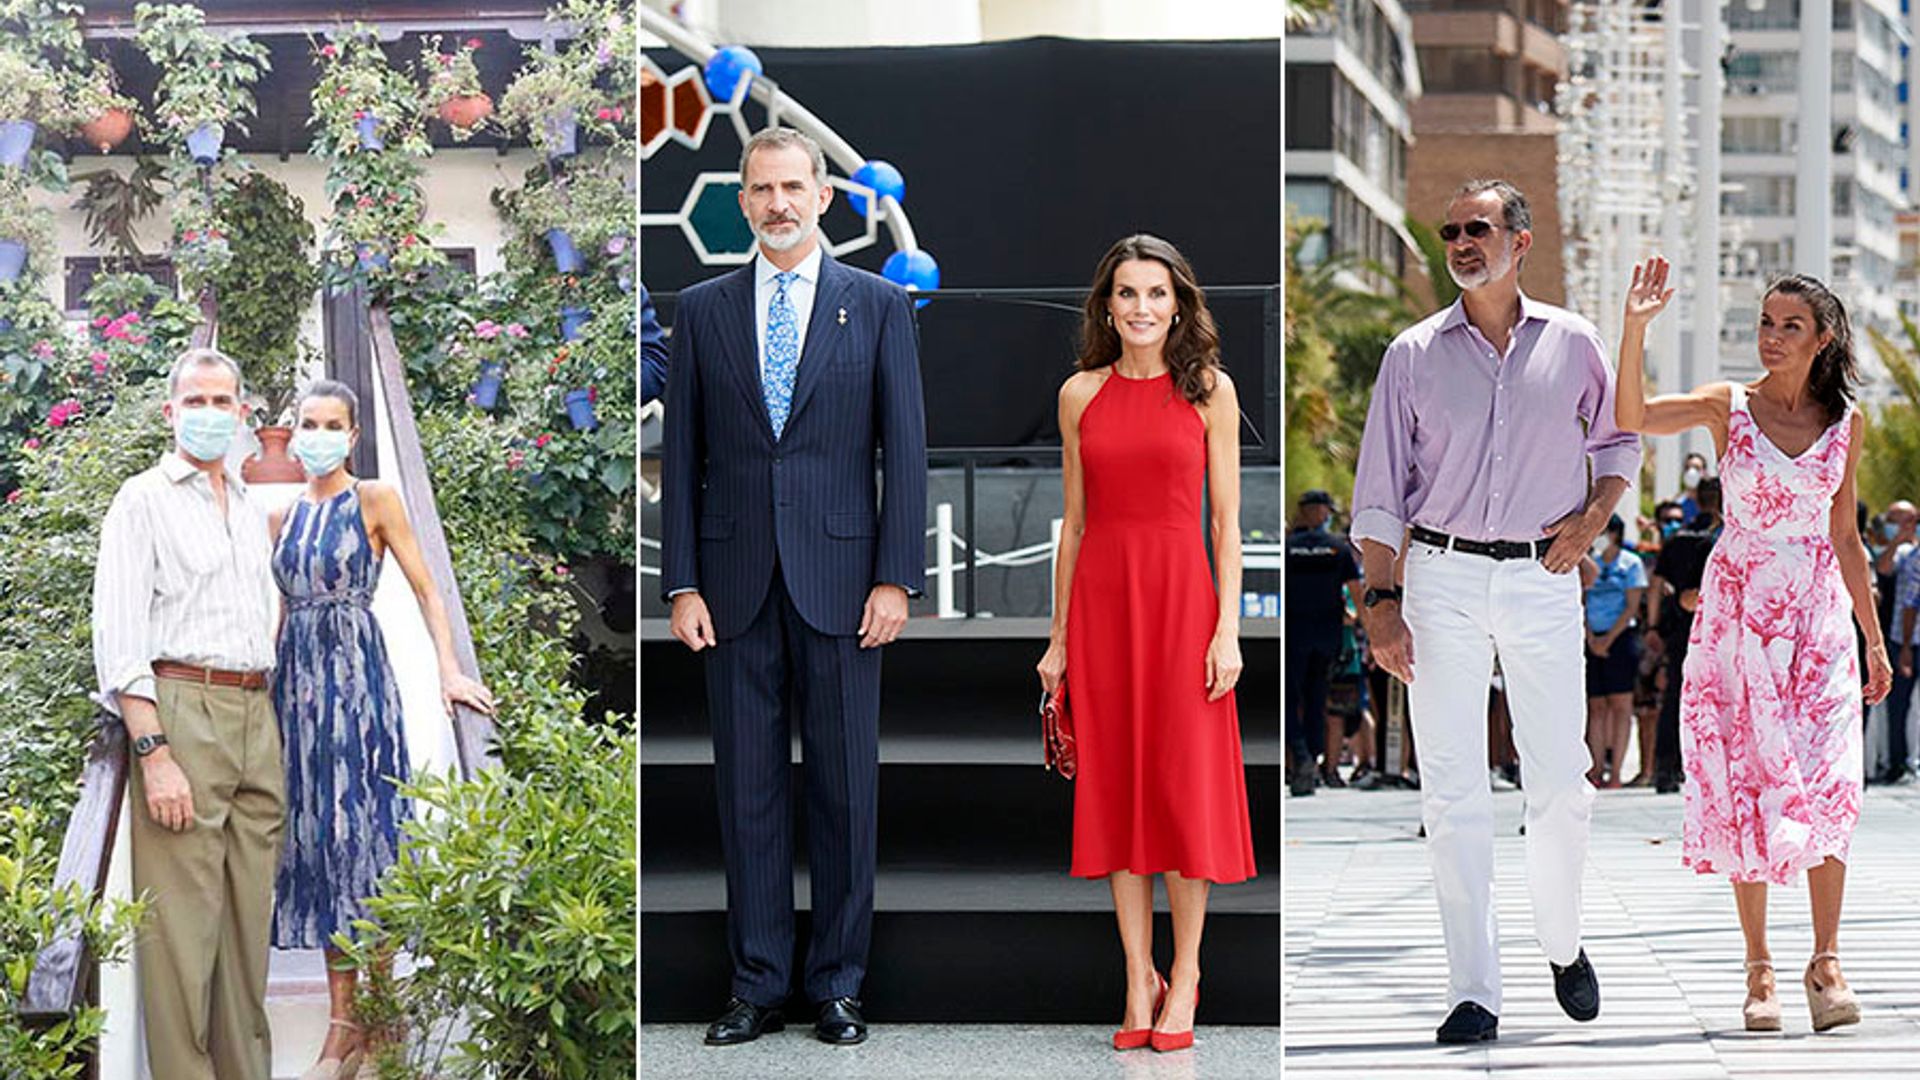 The best photos of Queen Letizia and King Felipe's royal tour of Spain